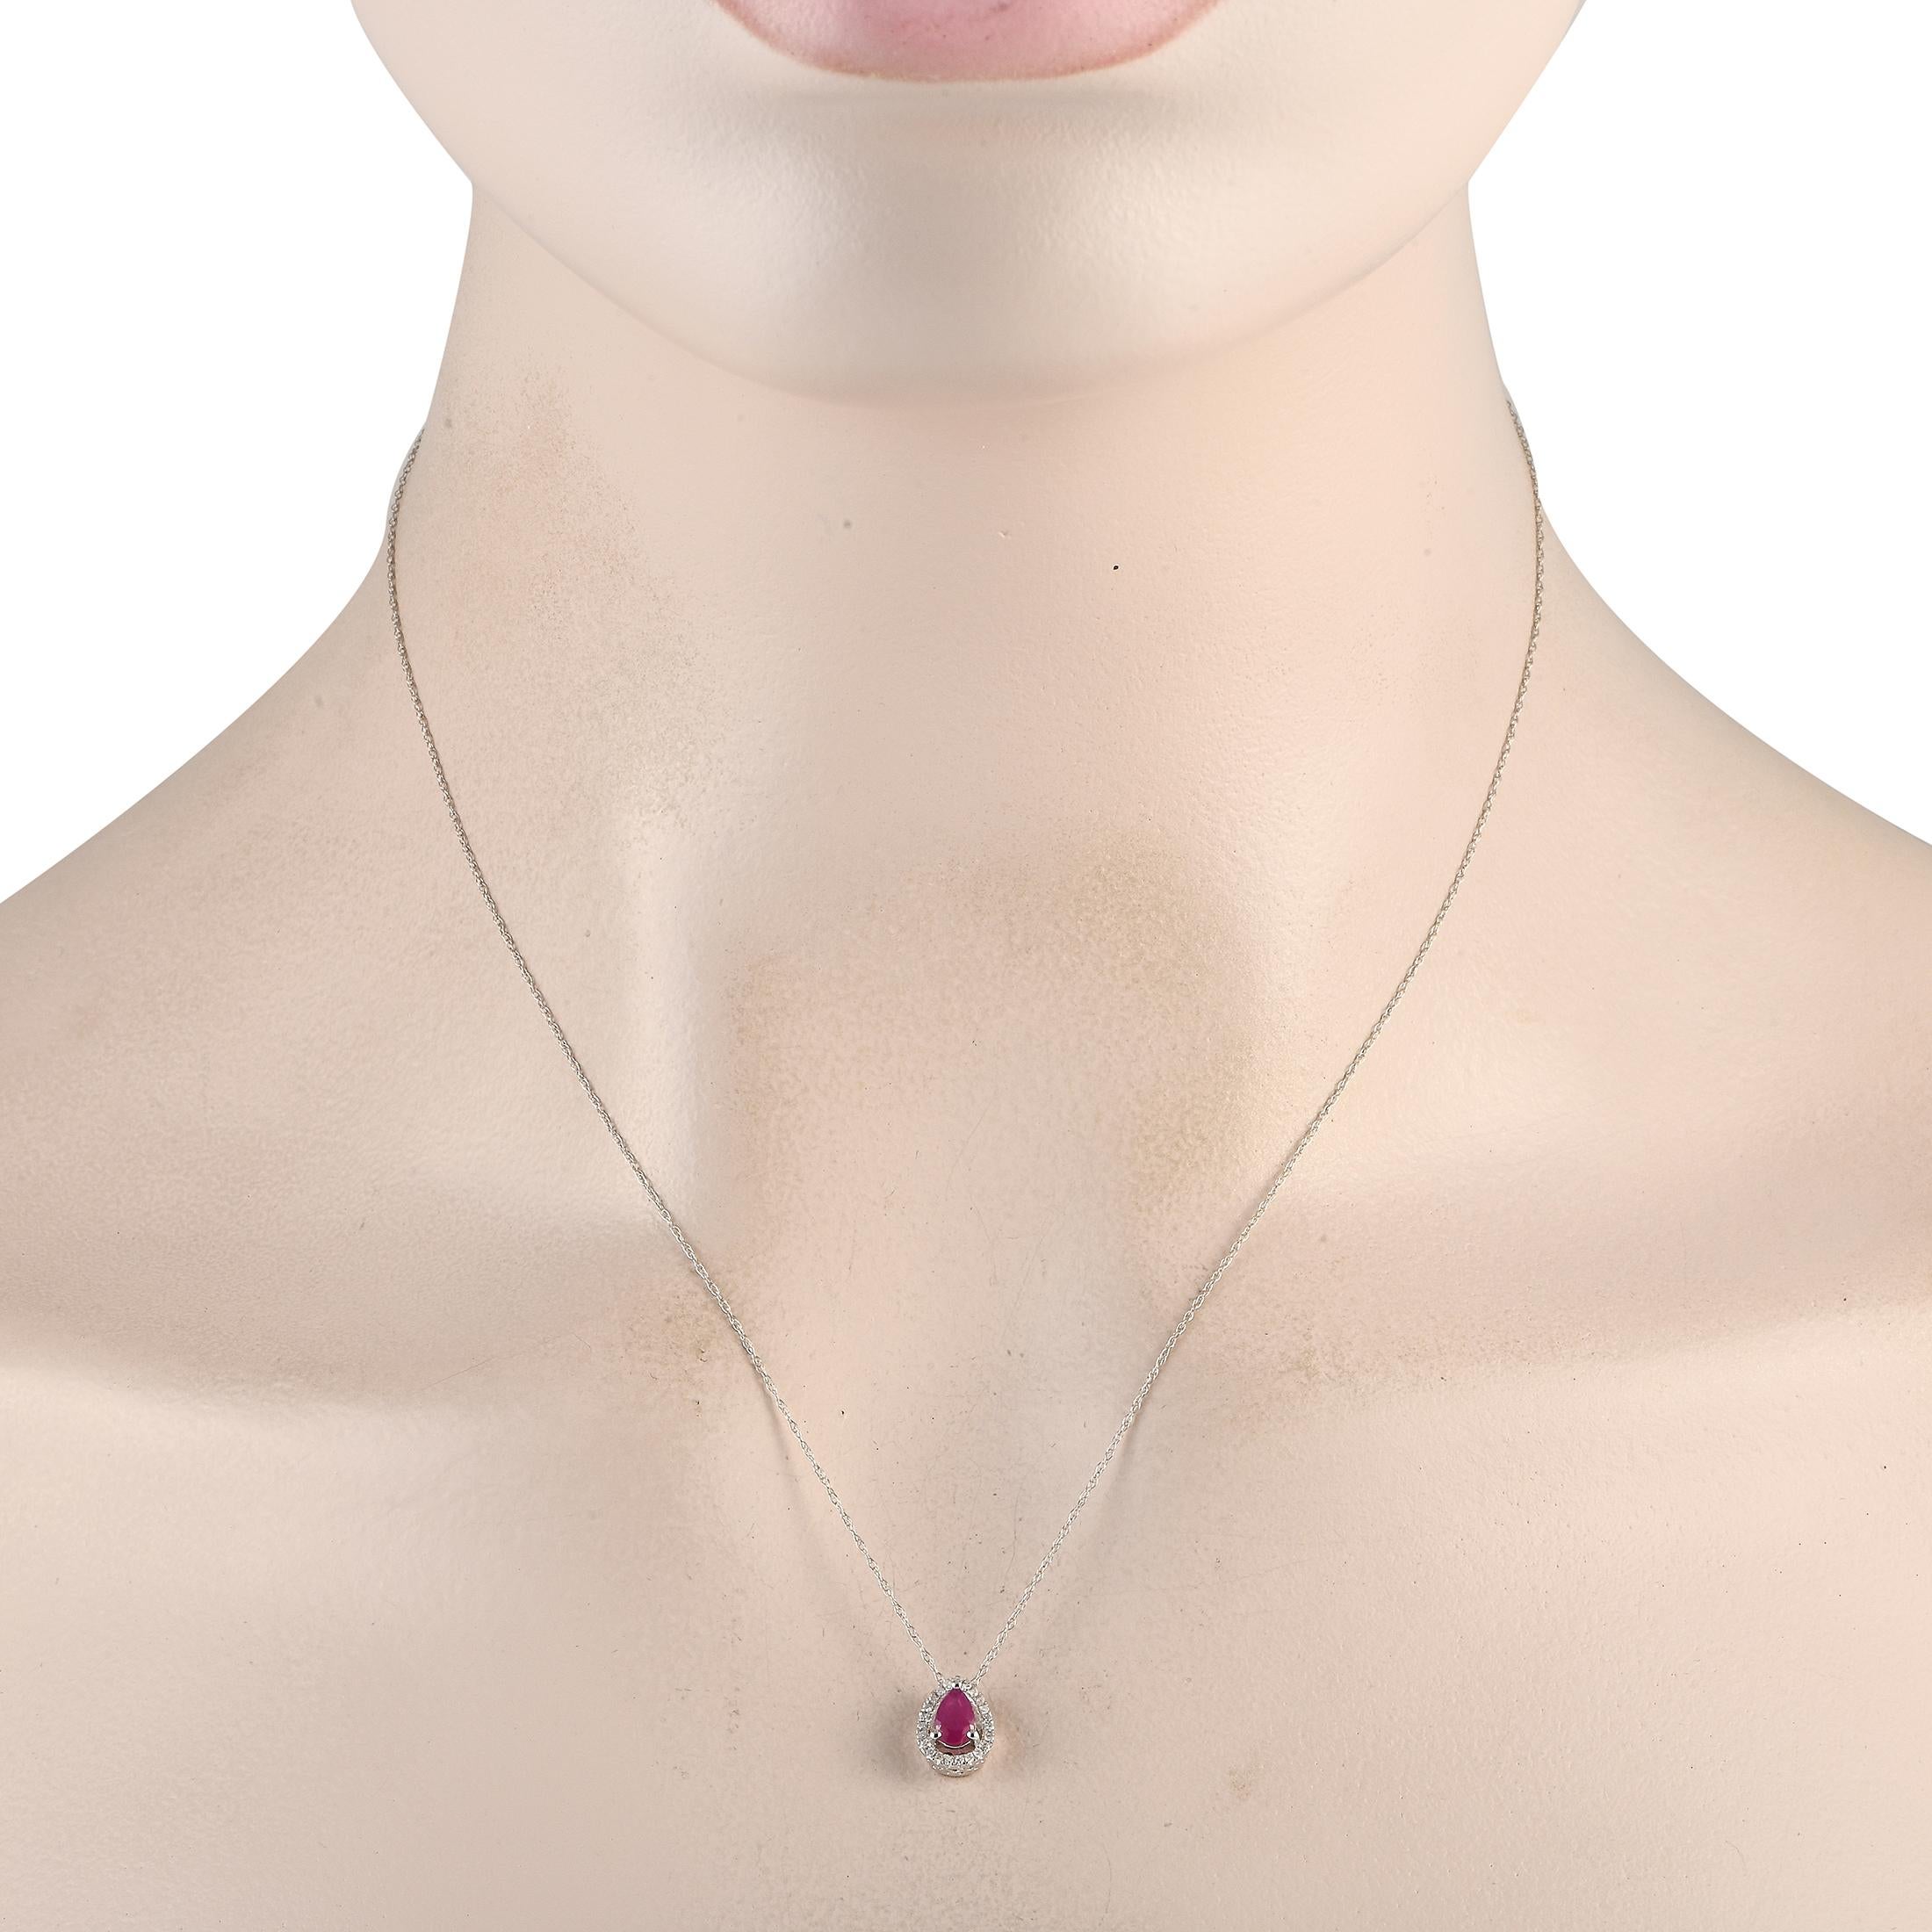 This necklace is inherently sophisticated. Suspended from an 18 chain, youll find a dainty 14K white gold pendant measuring 0.45 long by 0.25 wide. It comes complete with a captivating ruby center stone surrounded by diamonds totaling 0.07